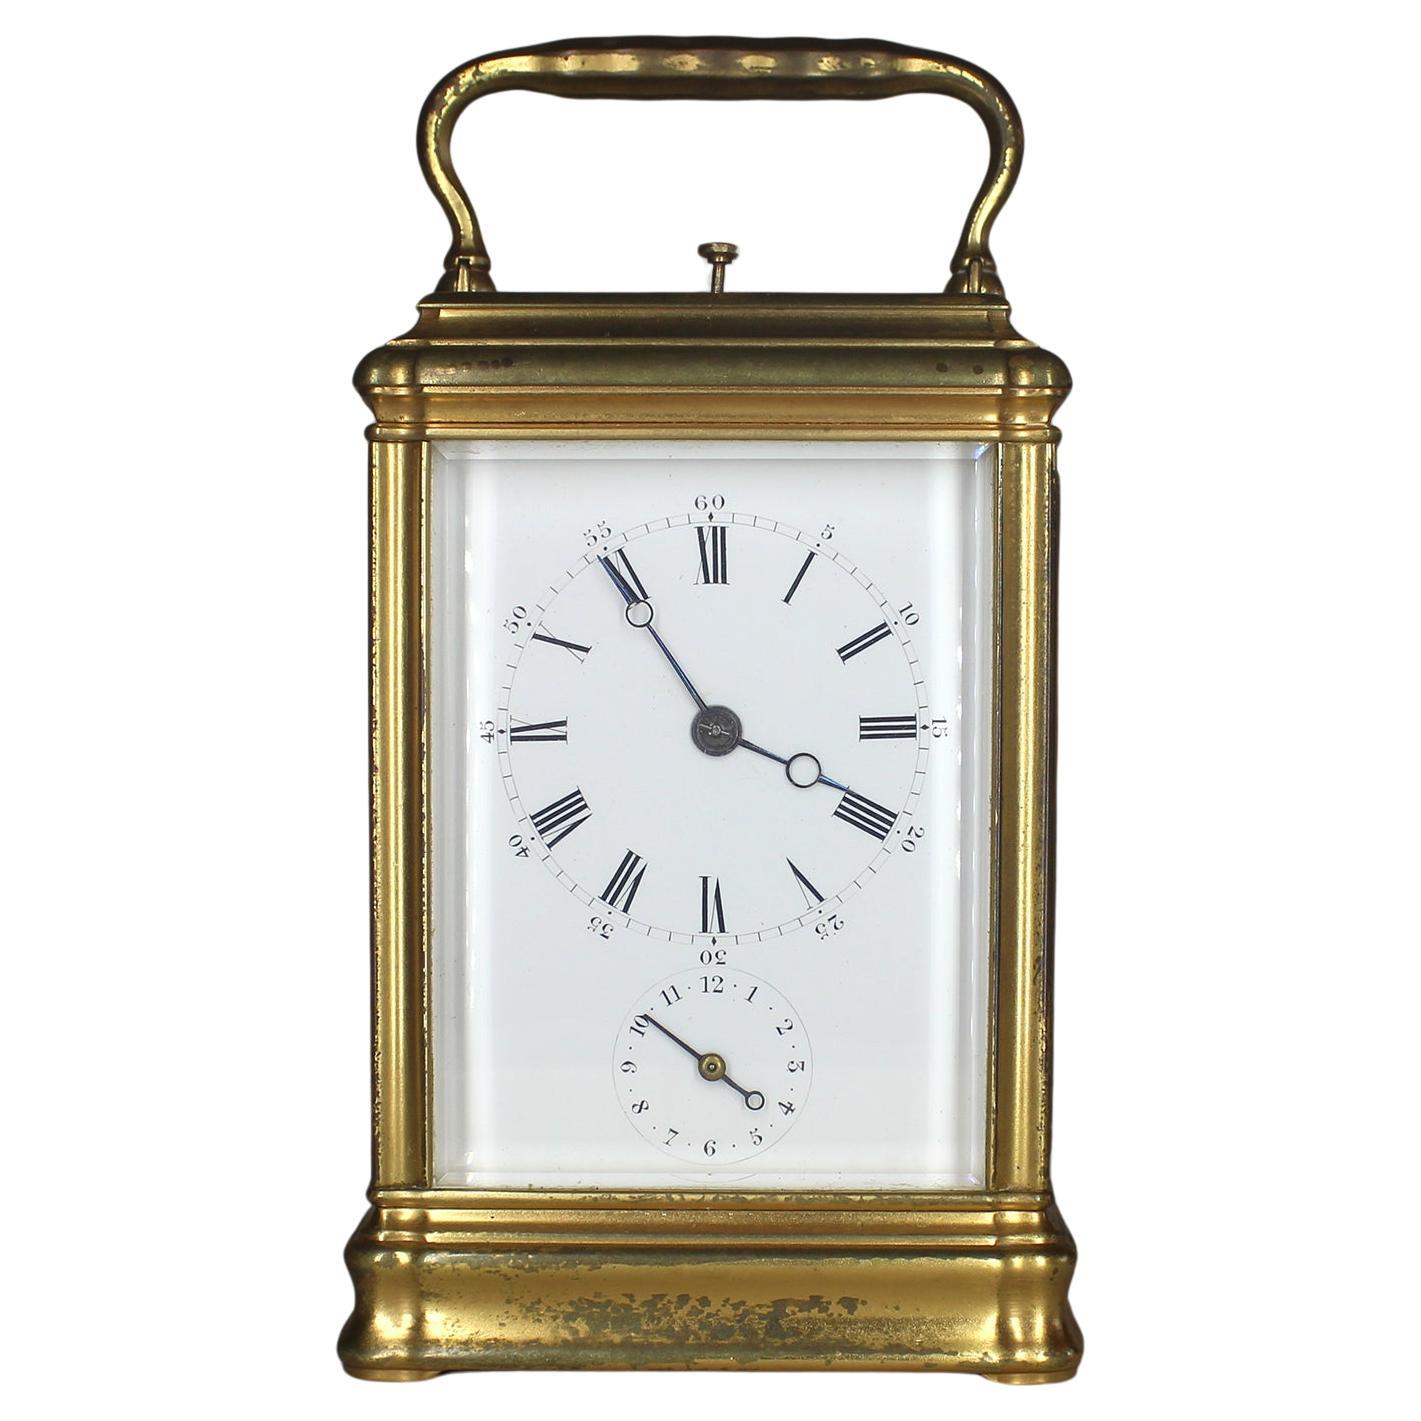 Repeating Drocourt Carriage Clock with Alarm